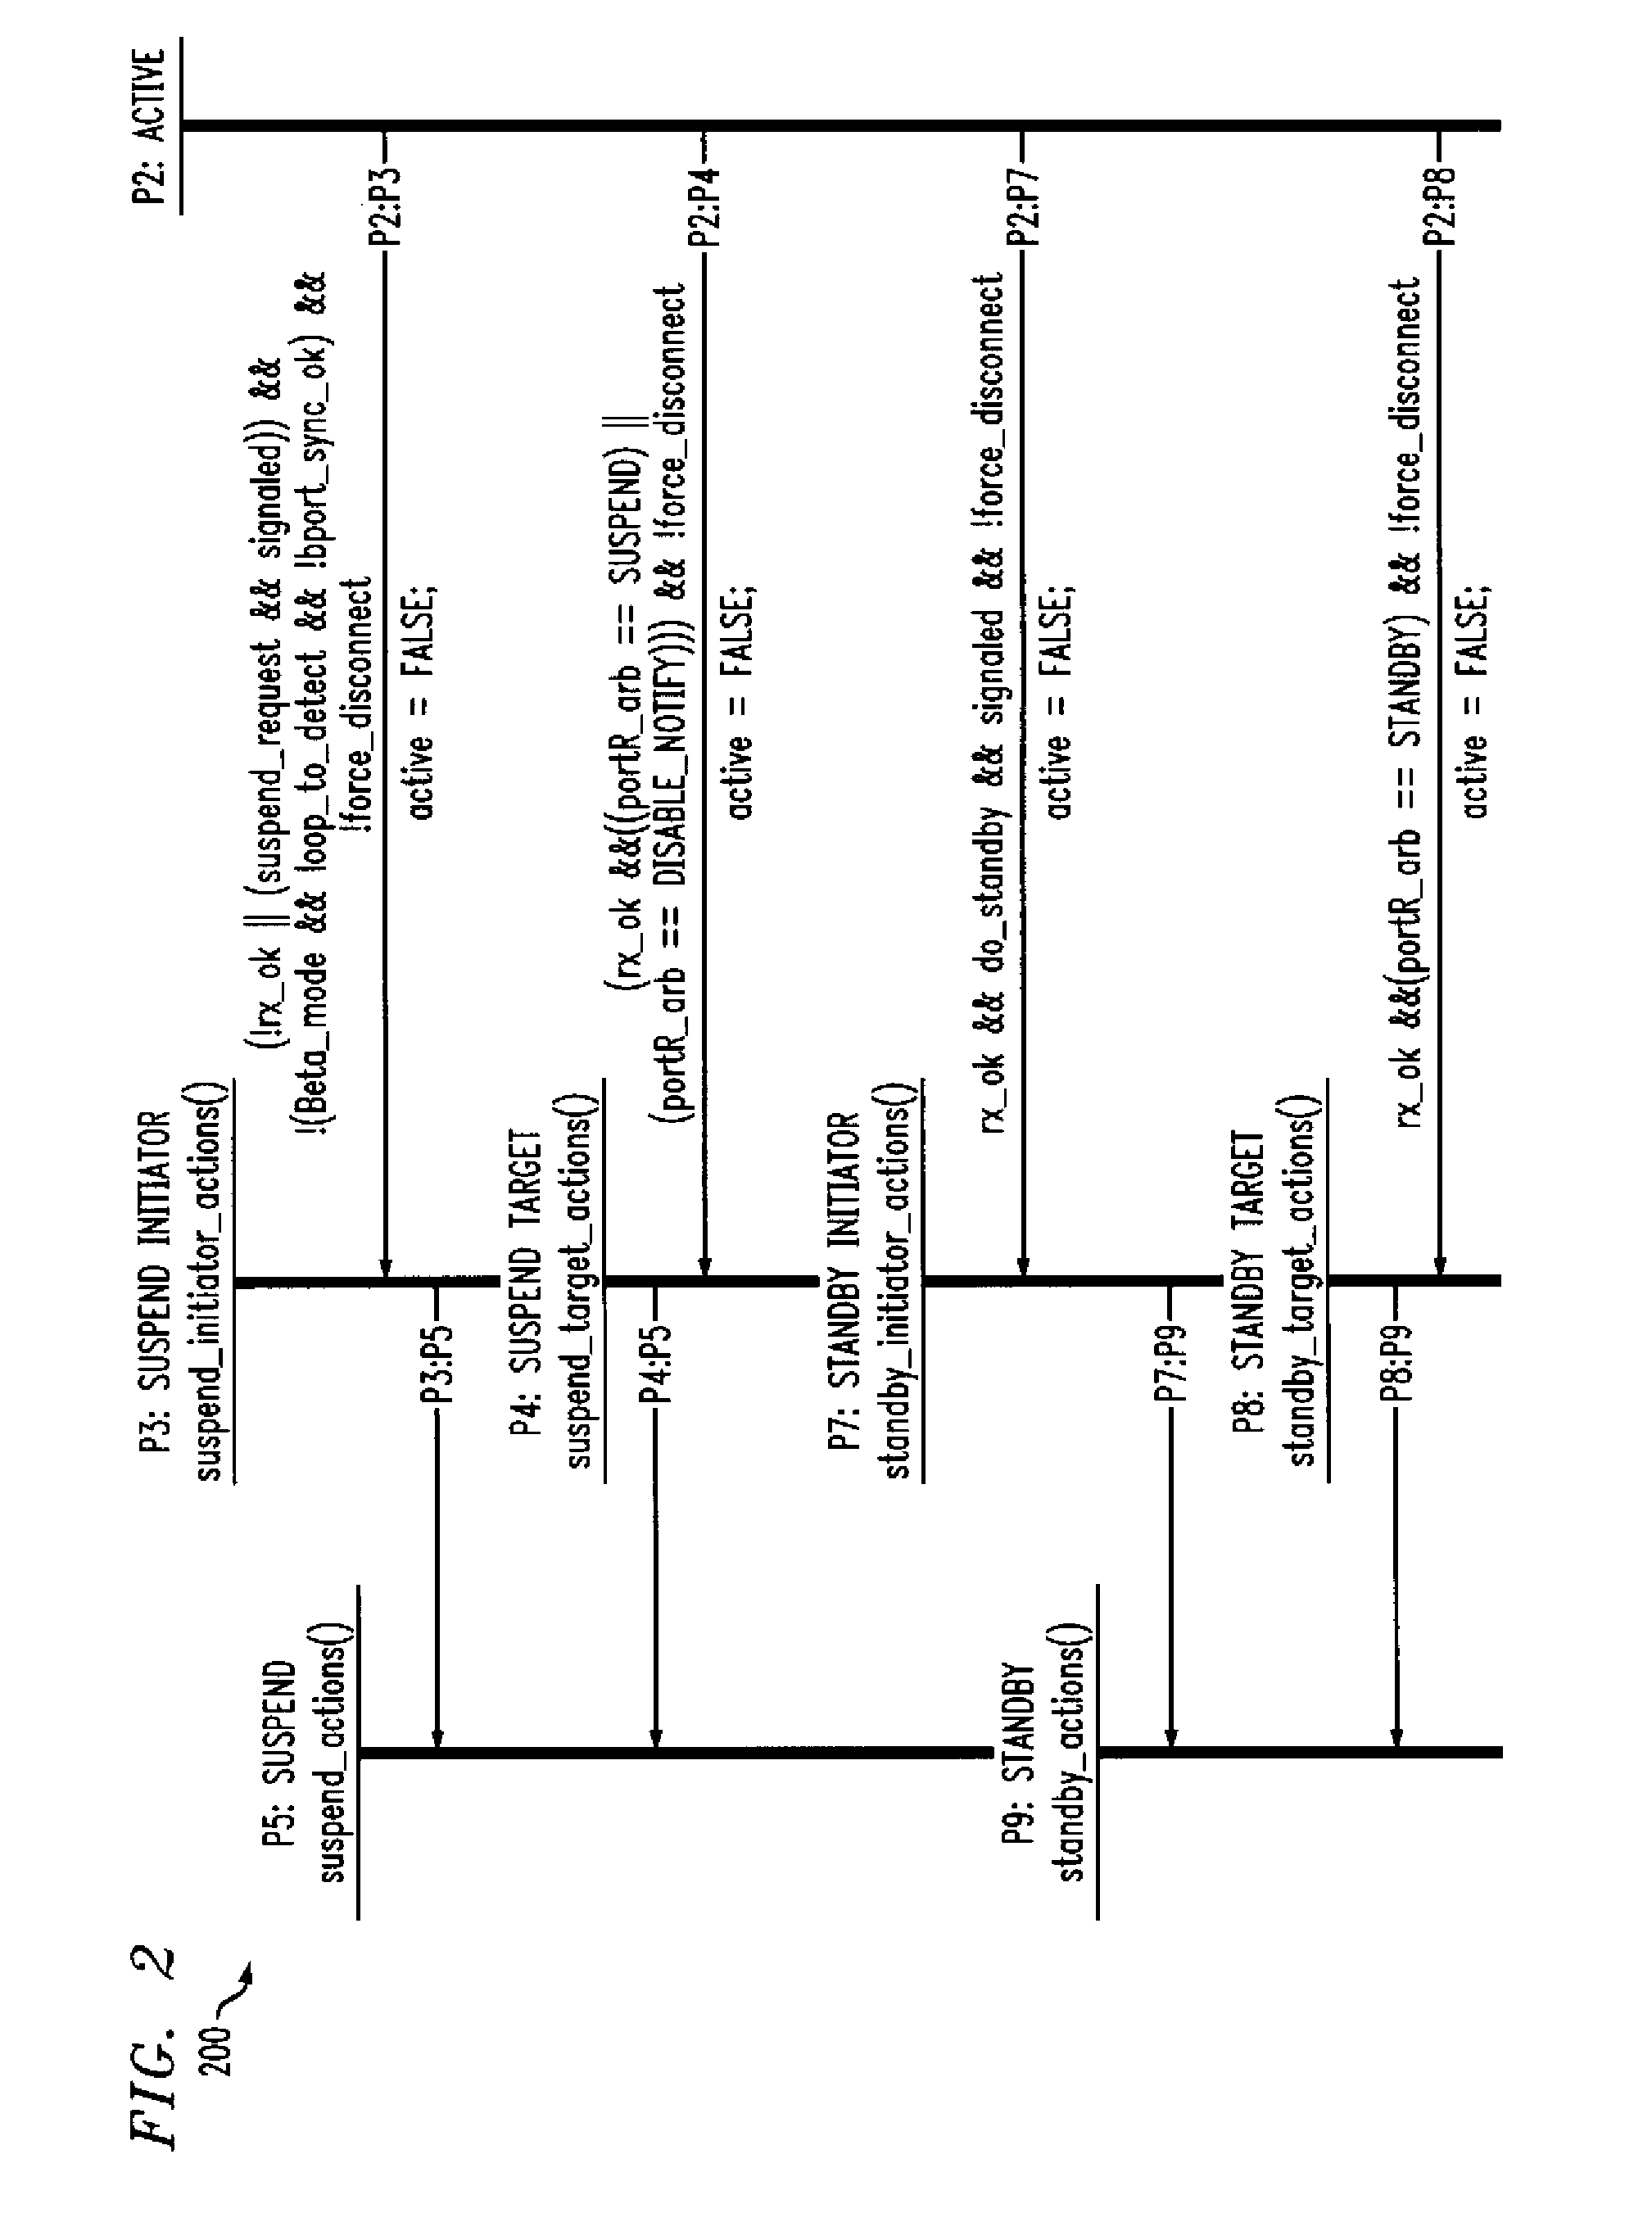 Transitioning of a Port in a Communications System from an Active State to a Standby State